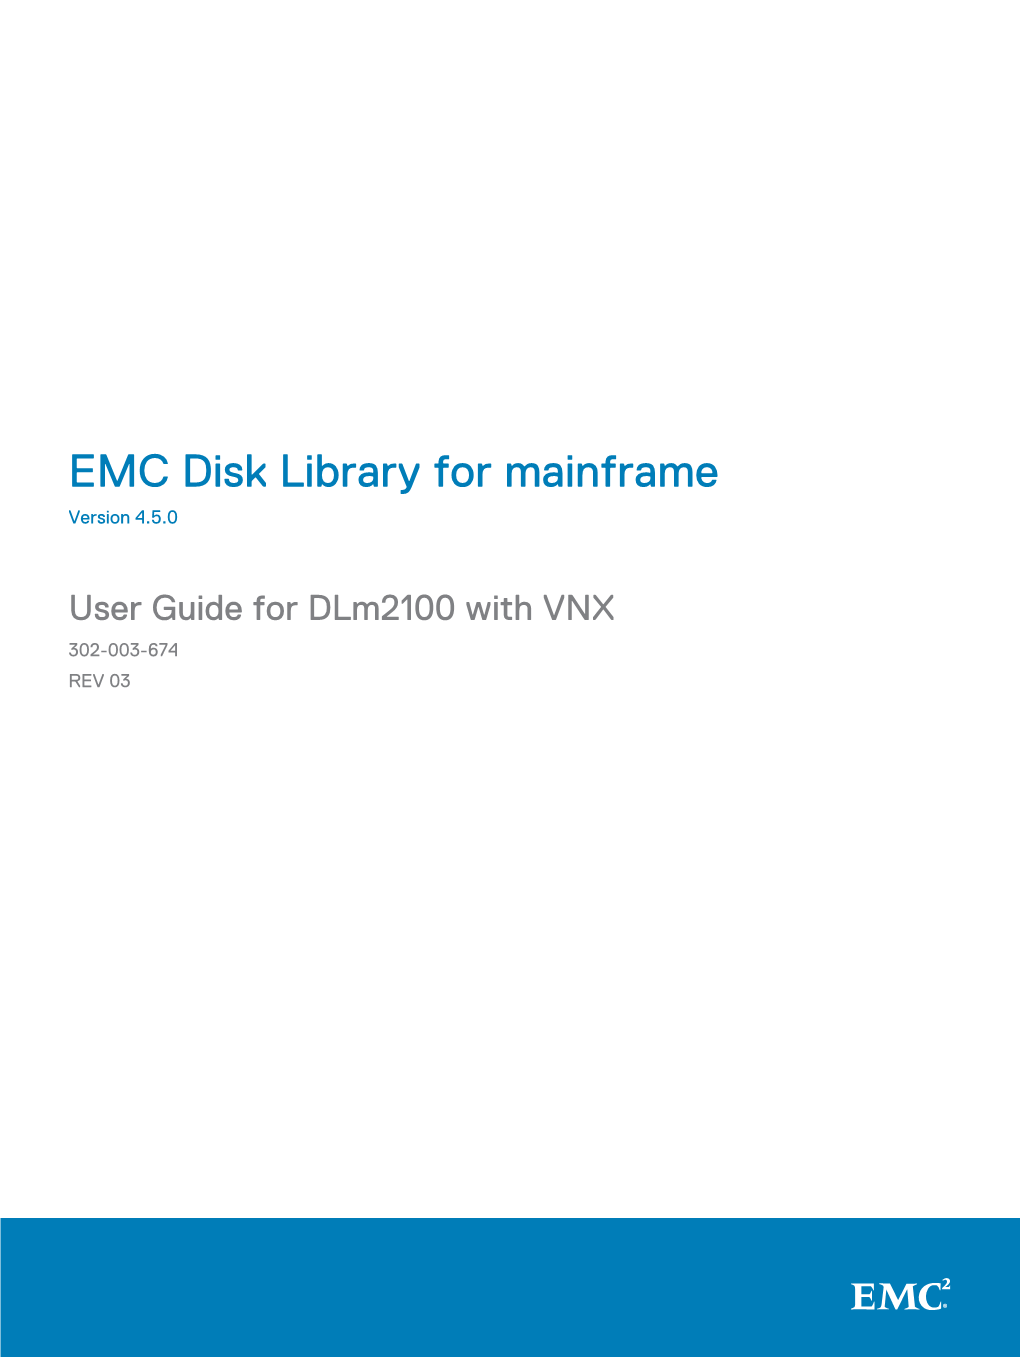 EMC Disk Library for Mainframe User Guide for Dlm2100 With